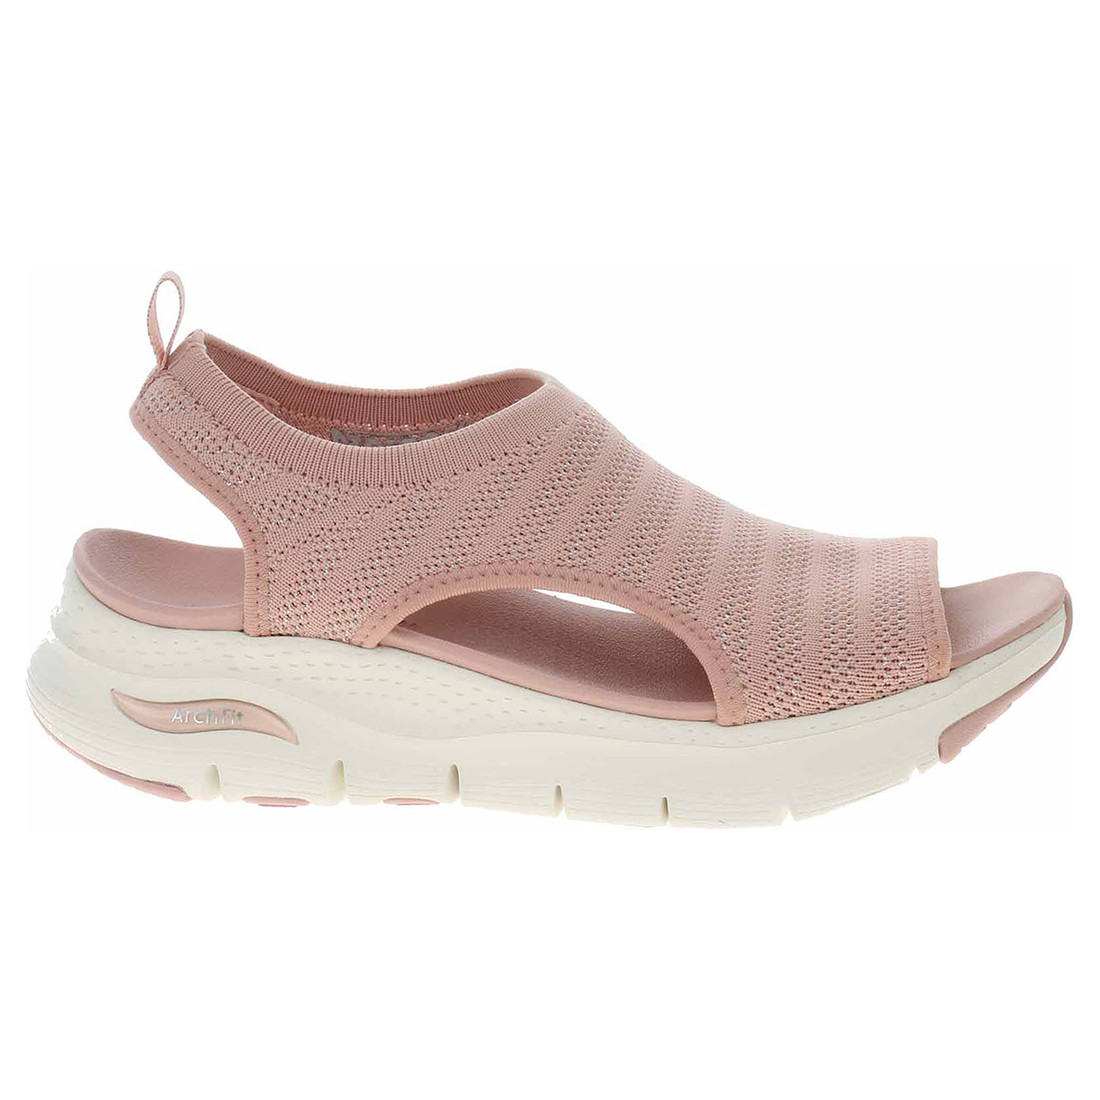 Ecco Skechers Arch Fit-Darling Days blush 23801842